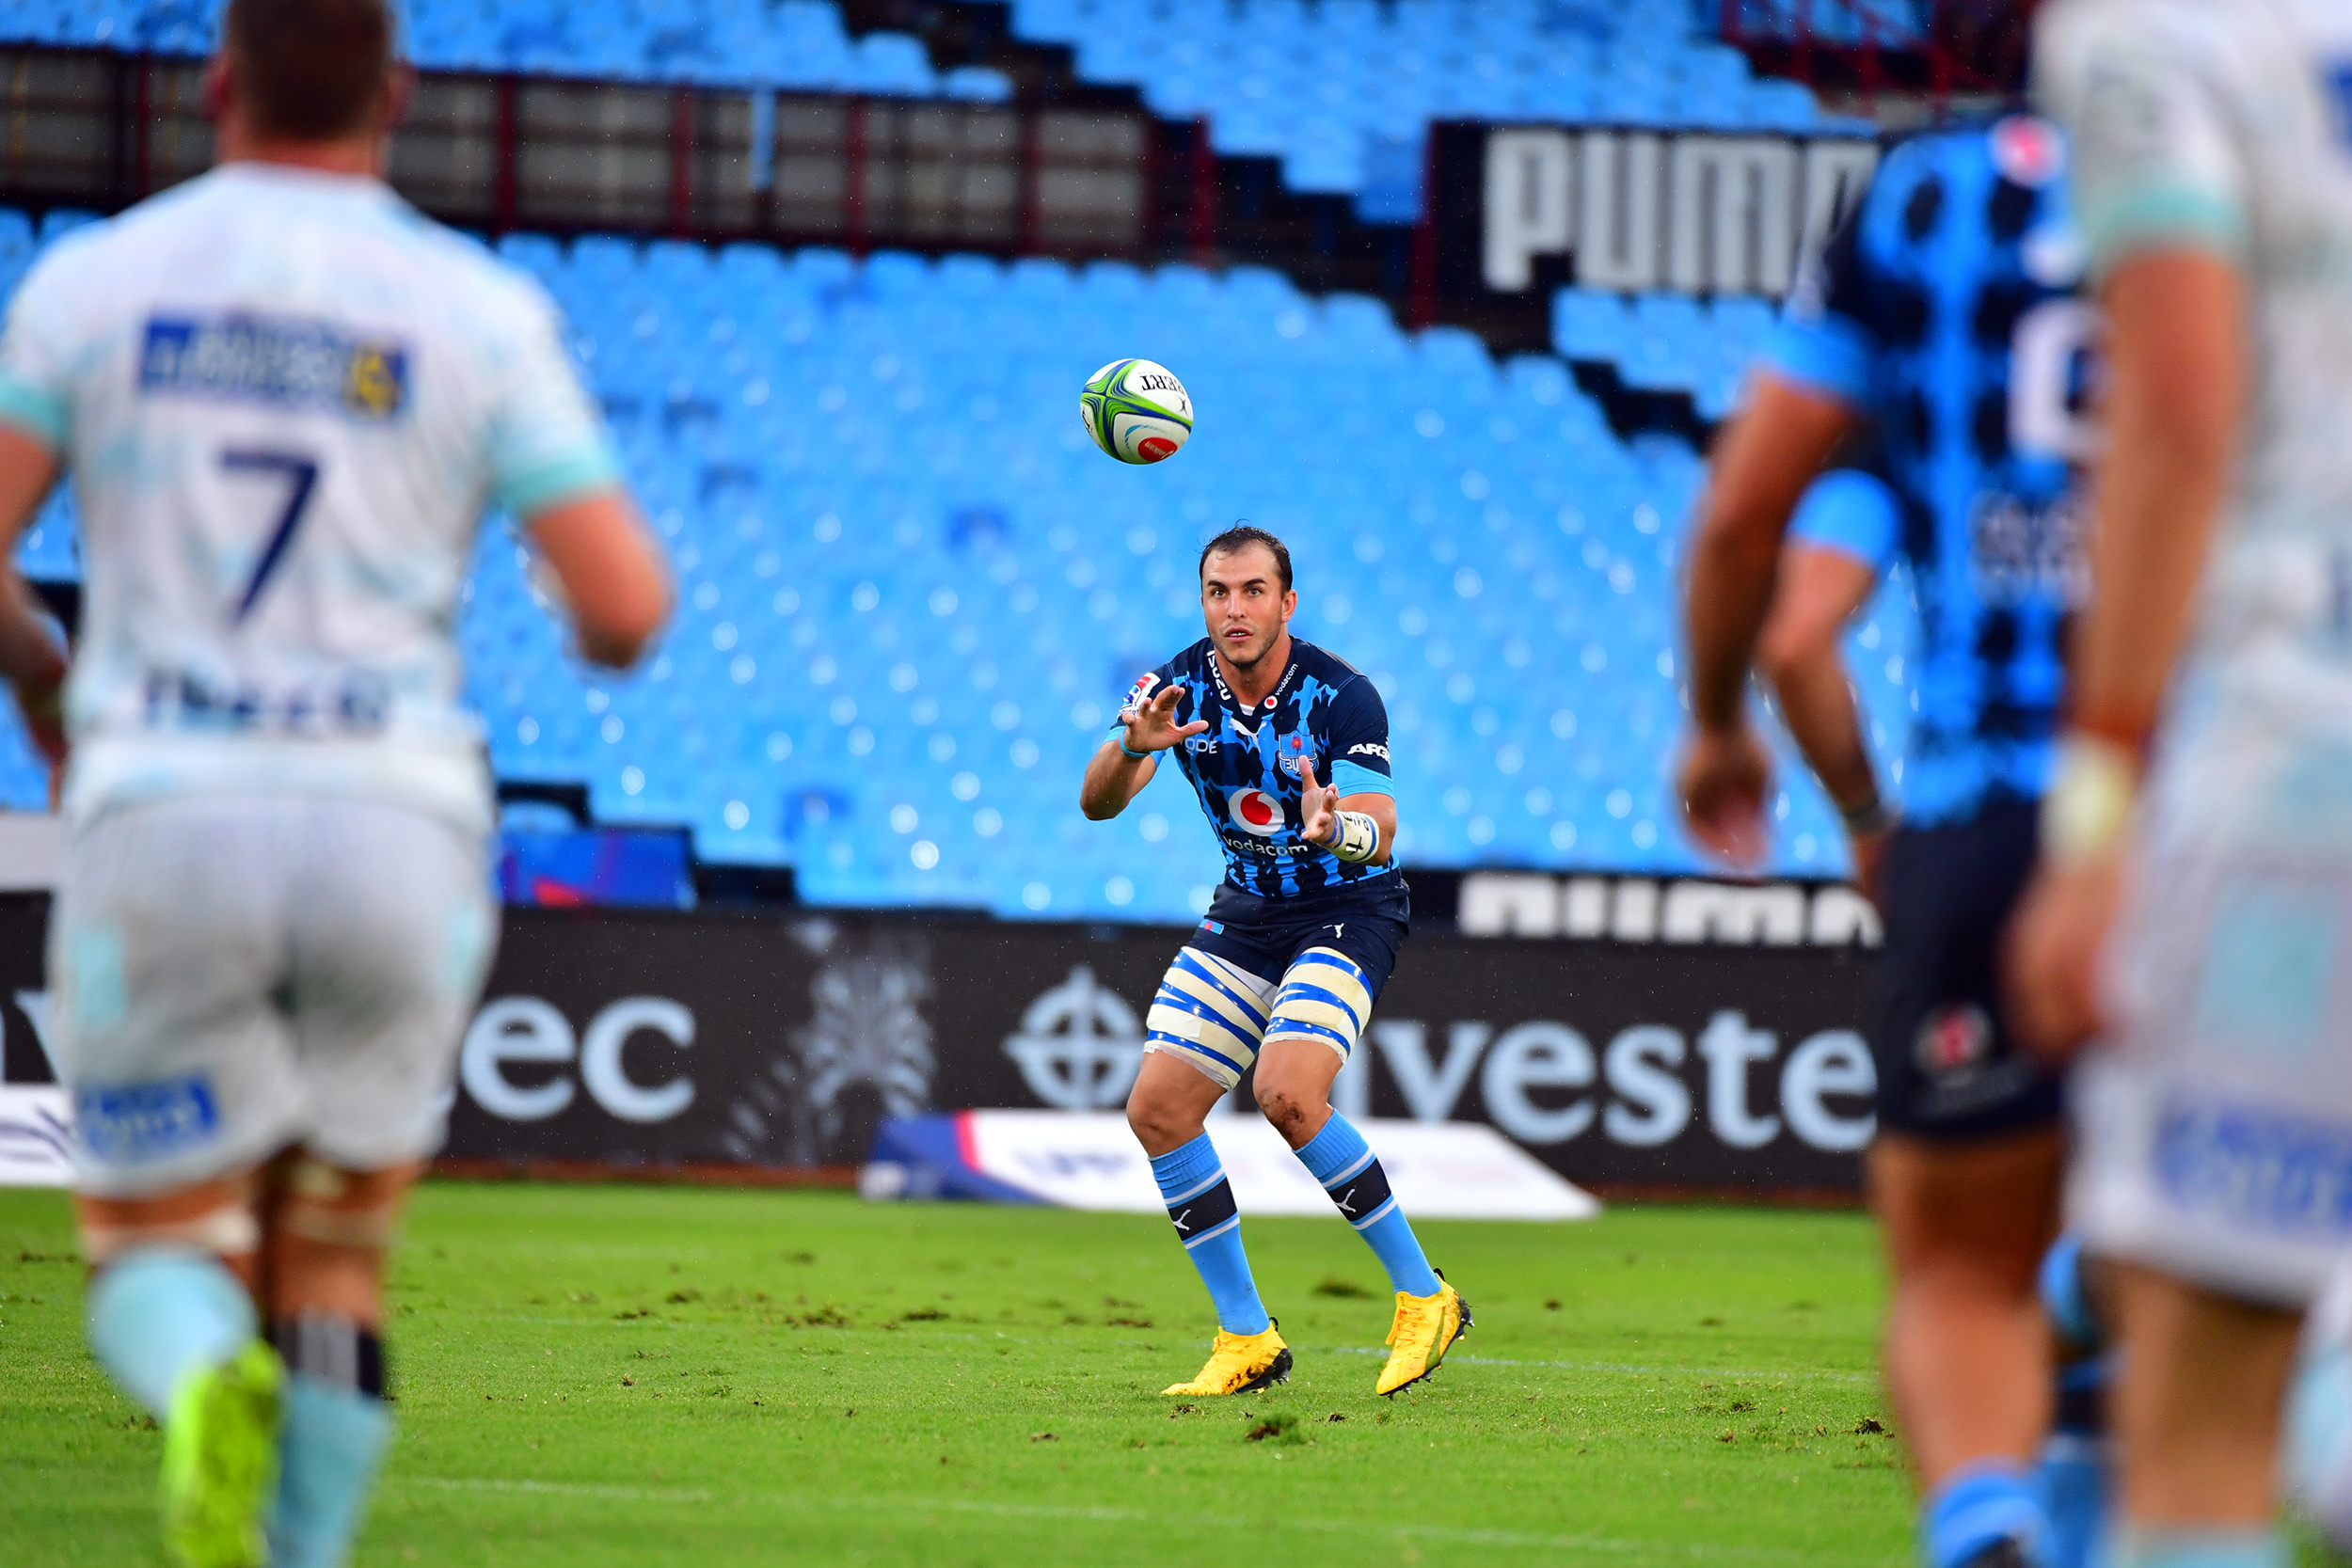 Vodacom Bulls Fitness Update brought to you by Arrie Nel Pharmacy Group and NeoLife SA – 24 February 2020